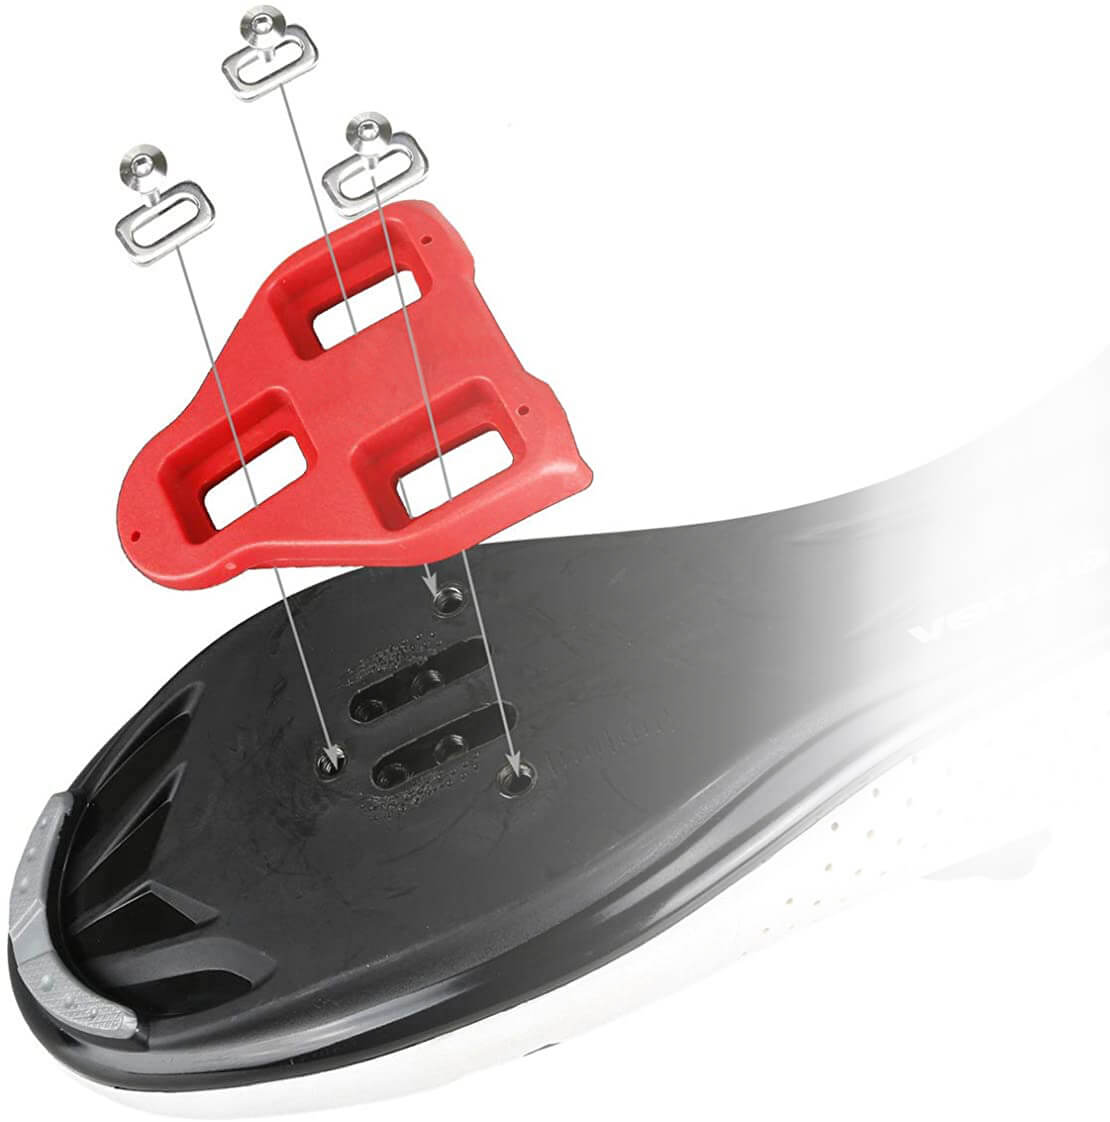  Bike Cleats Pedals cleats Compatible with Look Delta ( Incompatible with KEO Or SHIMANO)--Tacos de bicicleta Tacos de pedales compatibles con Look Delta (incompatible con KEO o SHIMANO) 